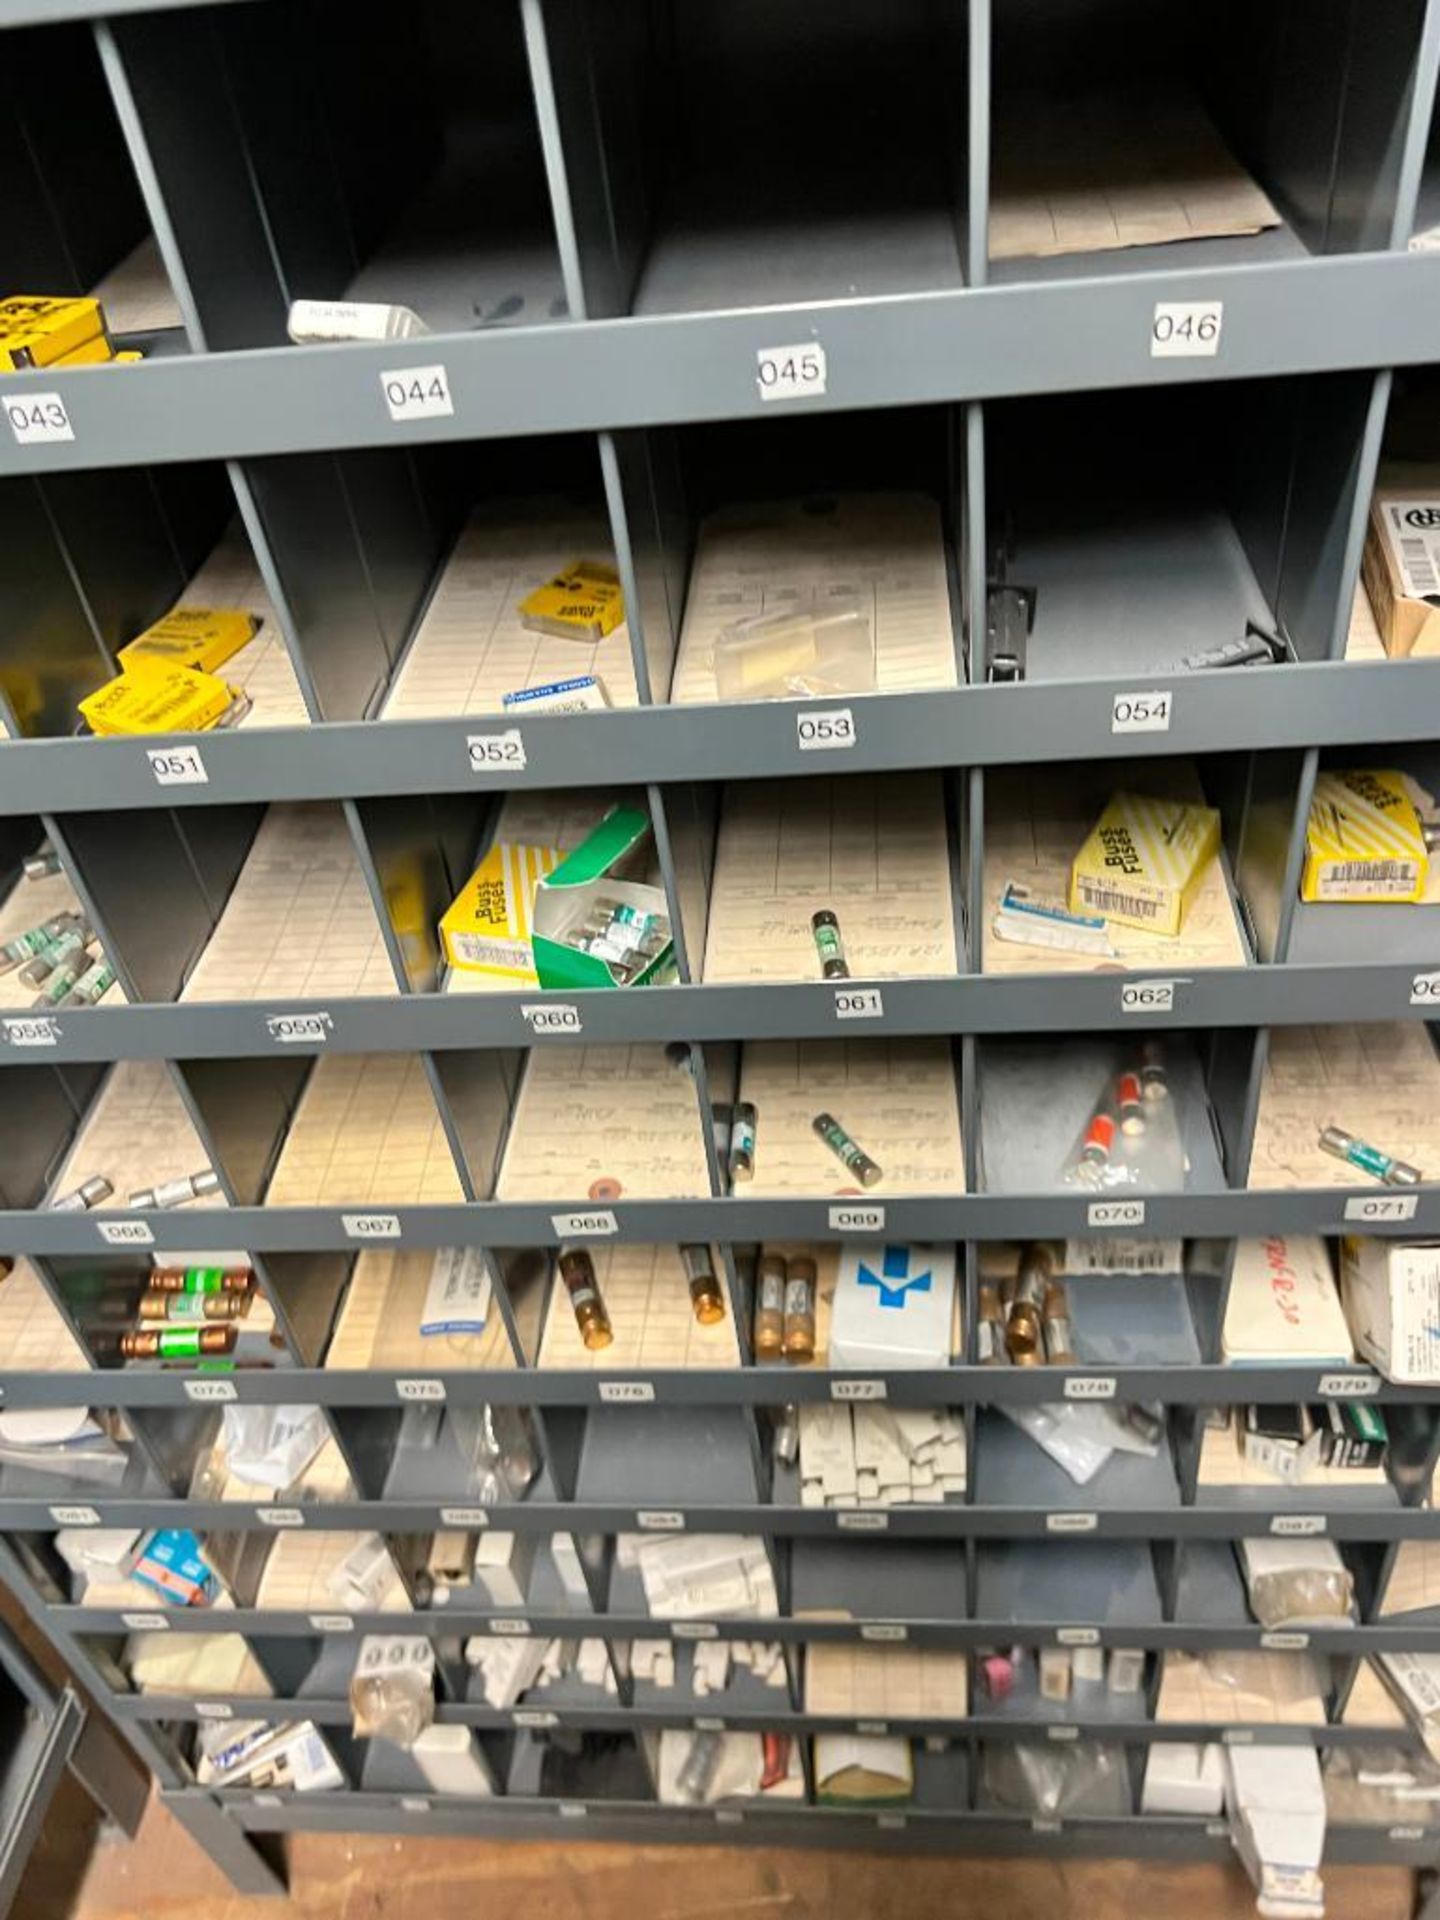 (28) Shelves of Assorted Parts, VERY LARGE LOT Consisting of MRO, Drives, Valves, PLC, Nuts, Bolts, - Image 46 of 67